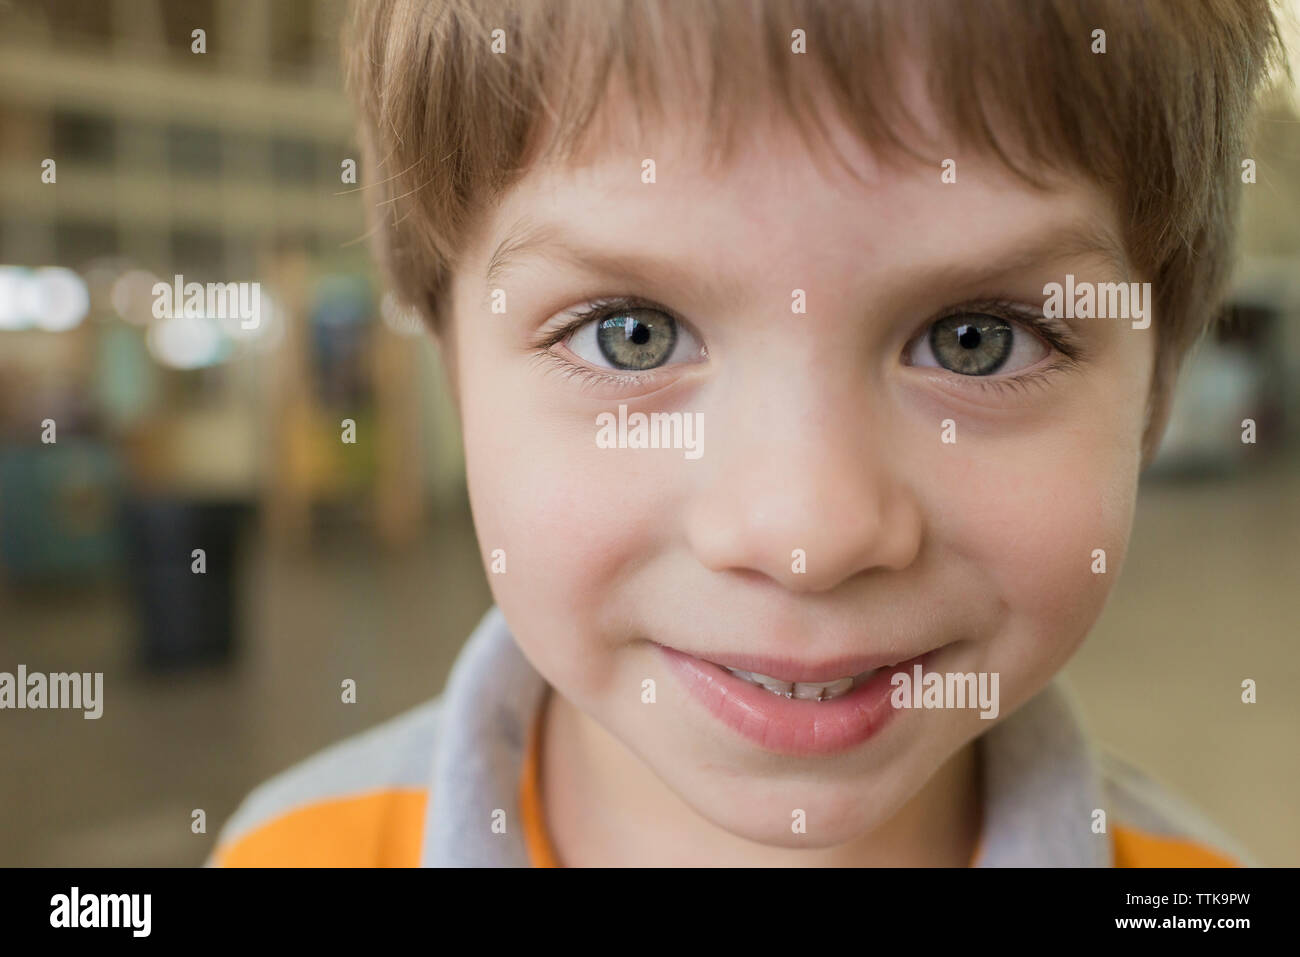 Close-up portrait of cute smiling boy Stock Photo